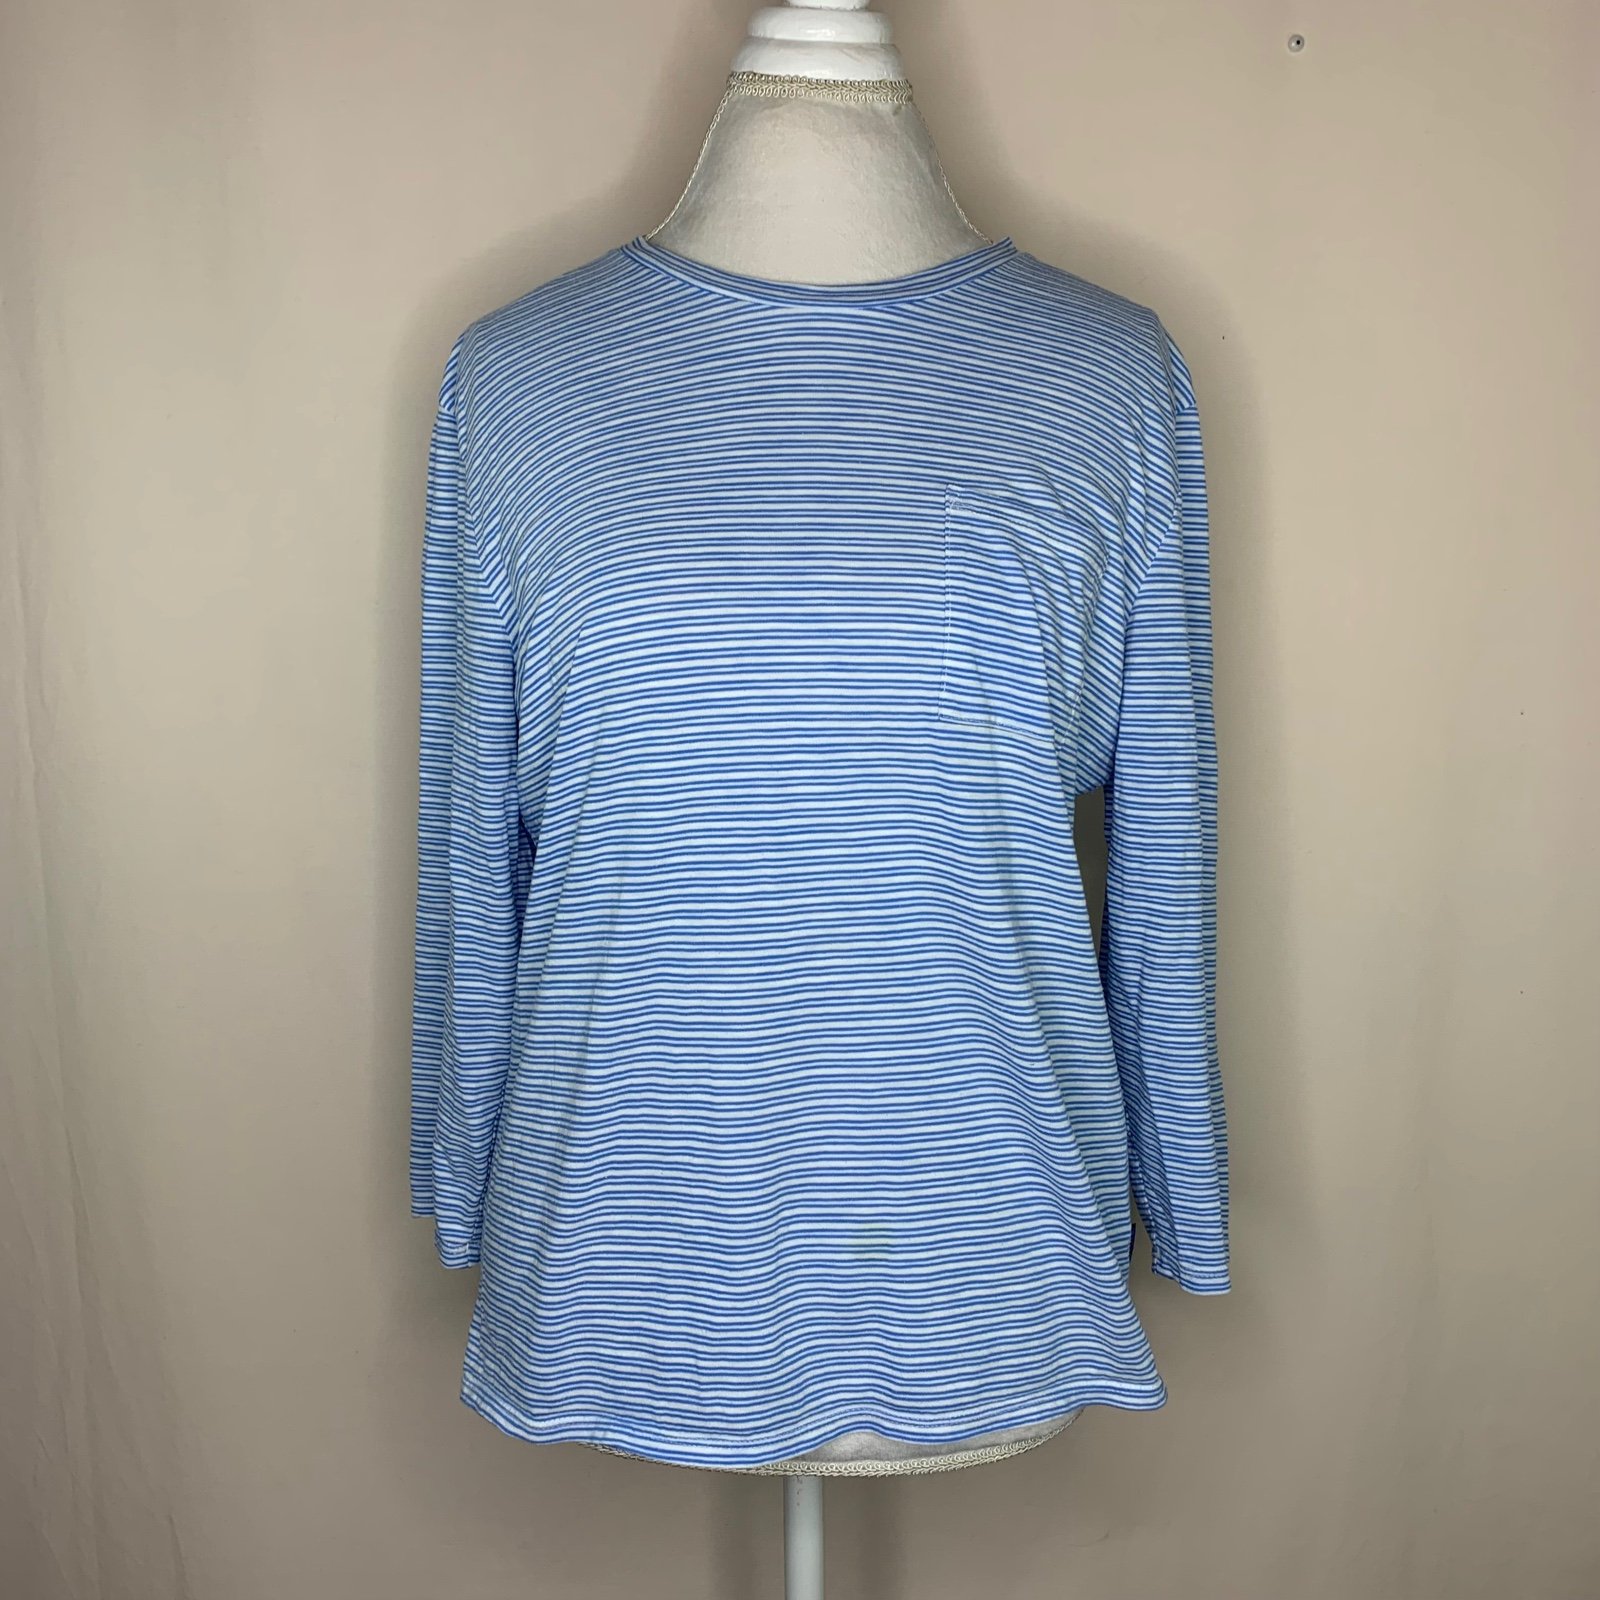 cheapest place to buy  Patagonia Organic Cotton Stripe Striped Long Sleeve Shirt Womens Size Large Oq9LWmr7L High Quaity